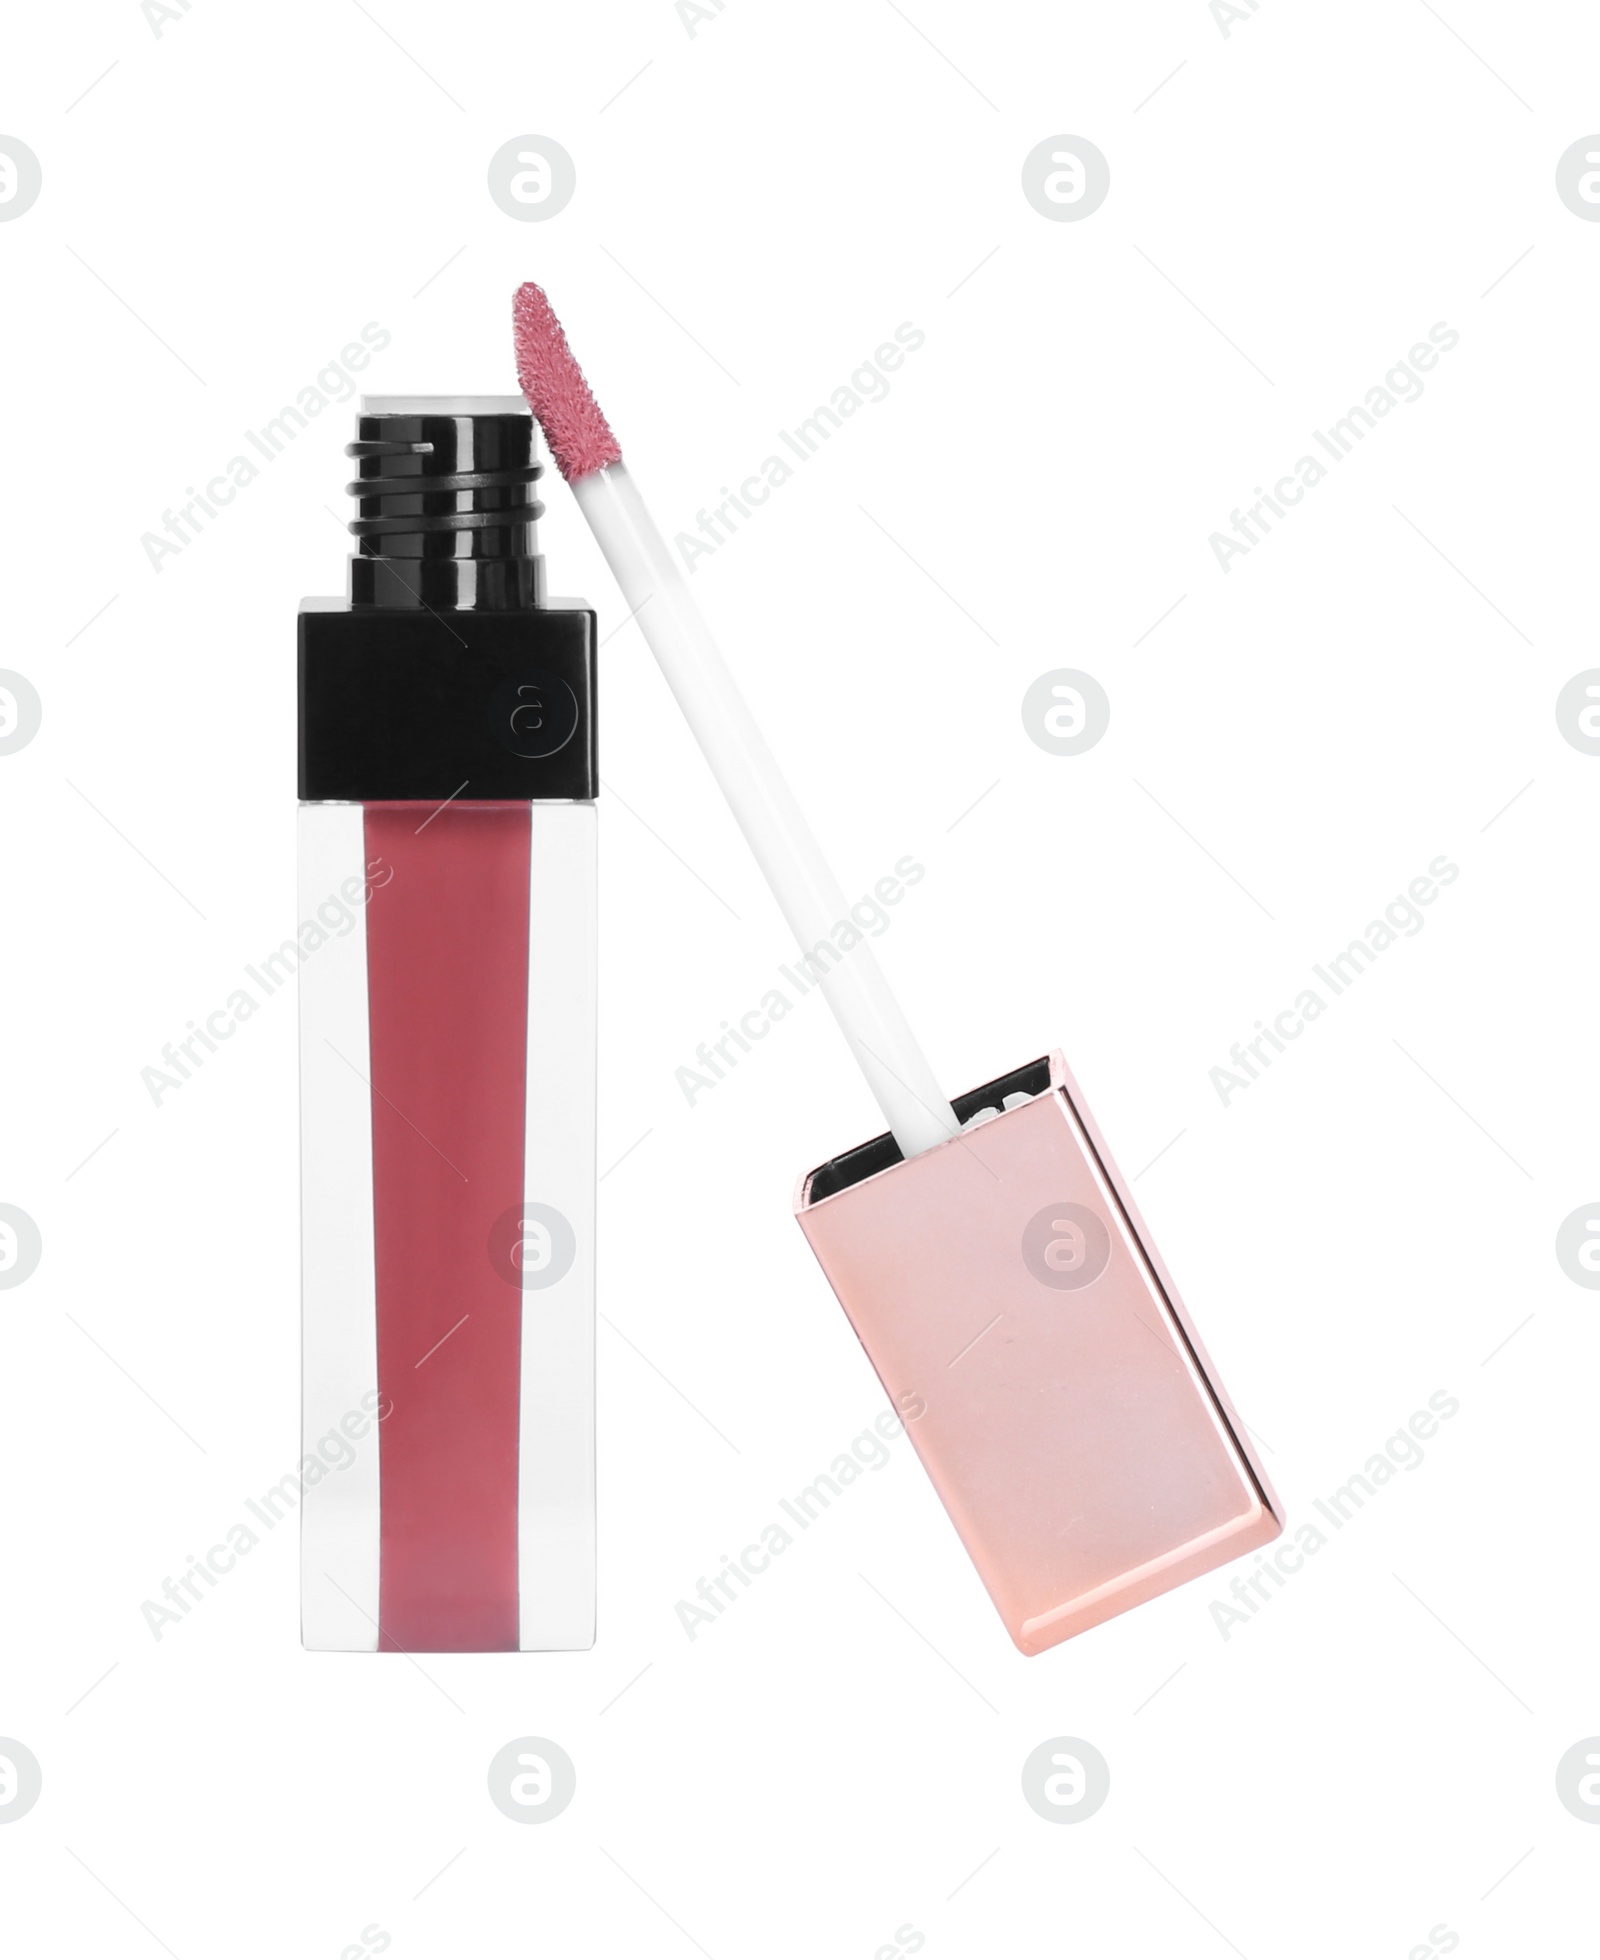 Photo of Lip gloss and applicator isolated on white. Cosmetic product